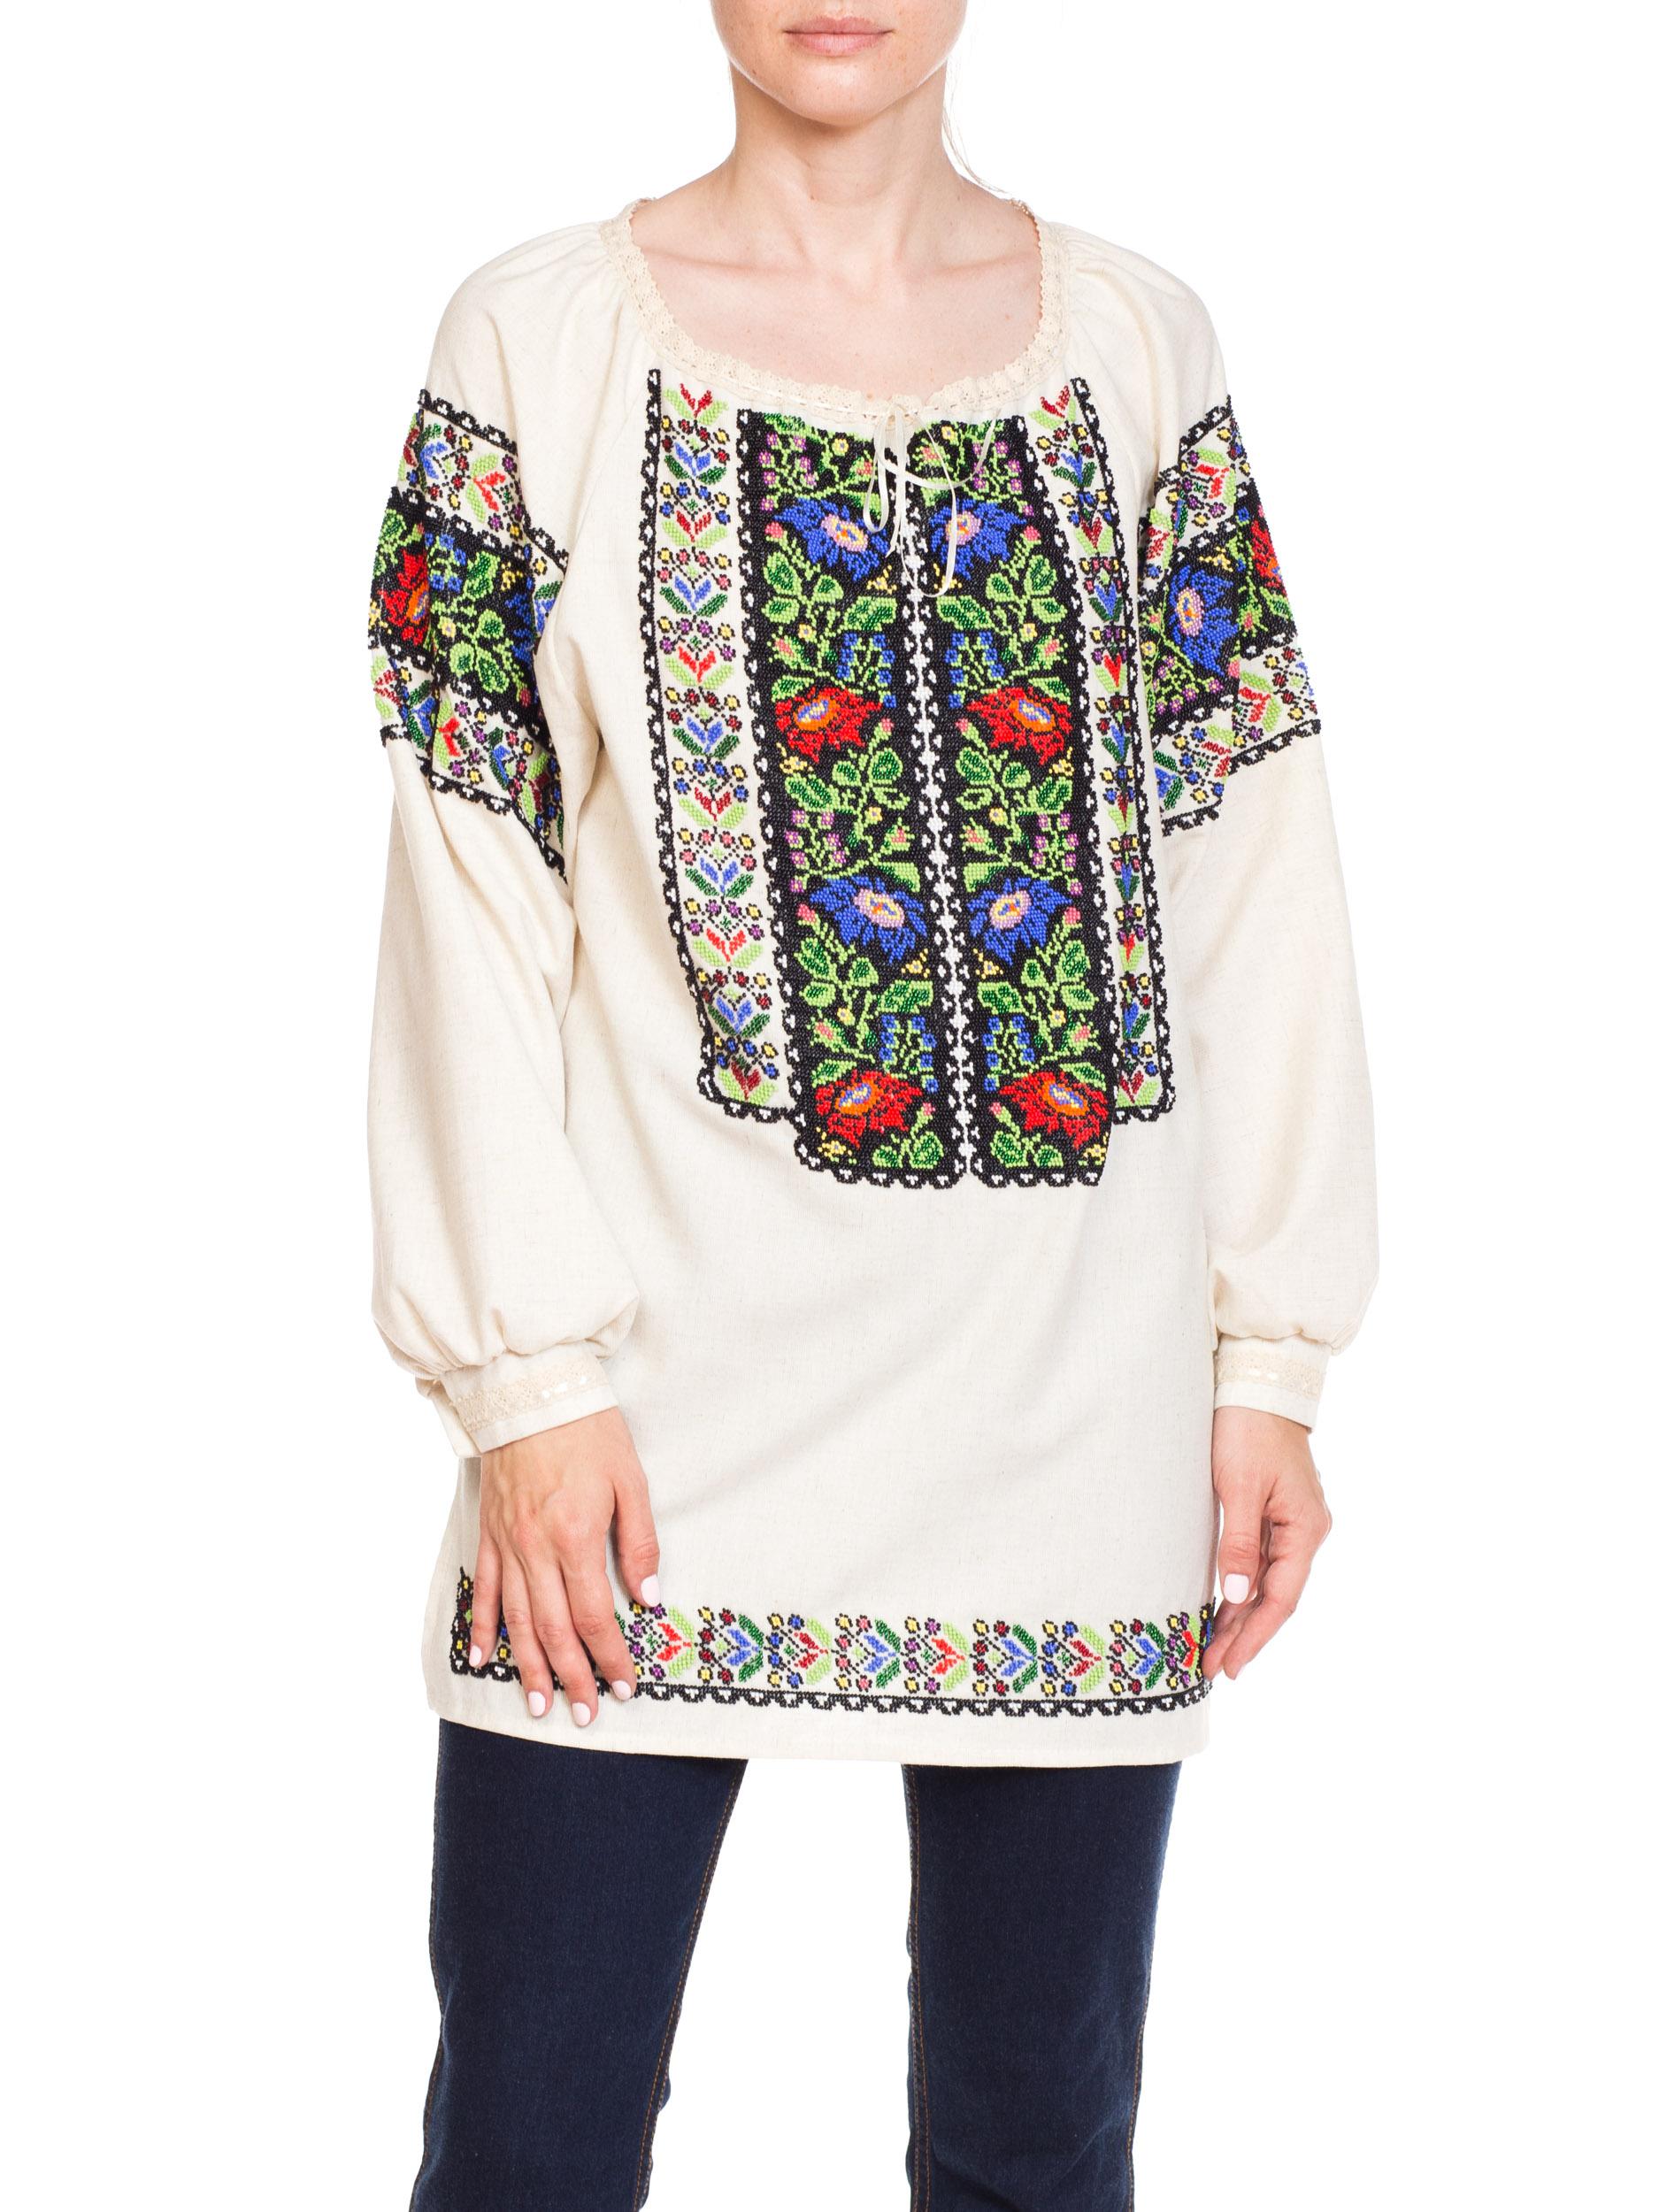 1950S Multicolor Hand Beaded Cotton Romanian Boho Folkloric Top
MORPHEW COLLECTION is made entirely by hand in our NYC Ateliér of rare antique materials sourced from around the globe. Our sustainable vintage materials represent over a century of